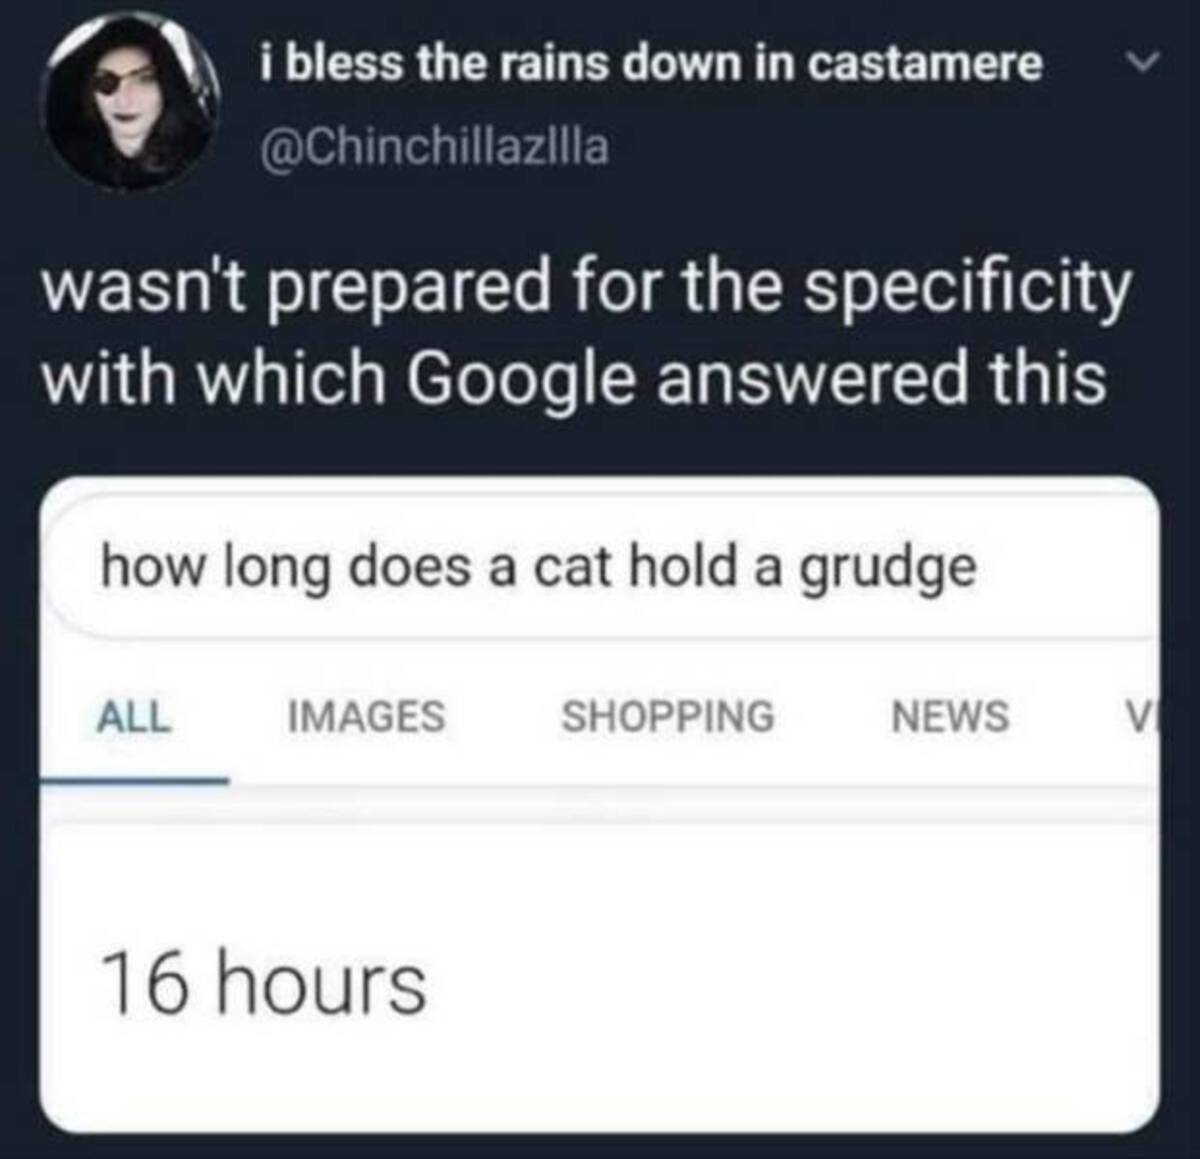 screenshot - i bless the rains down in castamere wasn't prepared for the specificity with which Google answered this how long does a cat hold a grudge All Images 16 hours Shopping News V